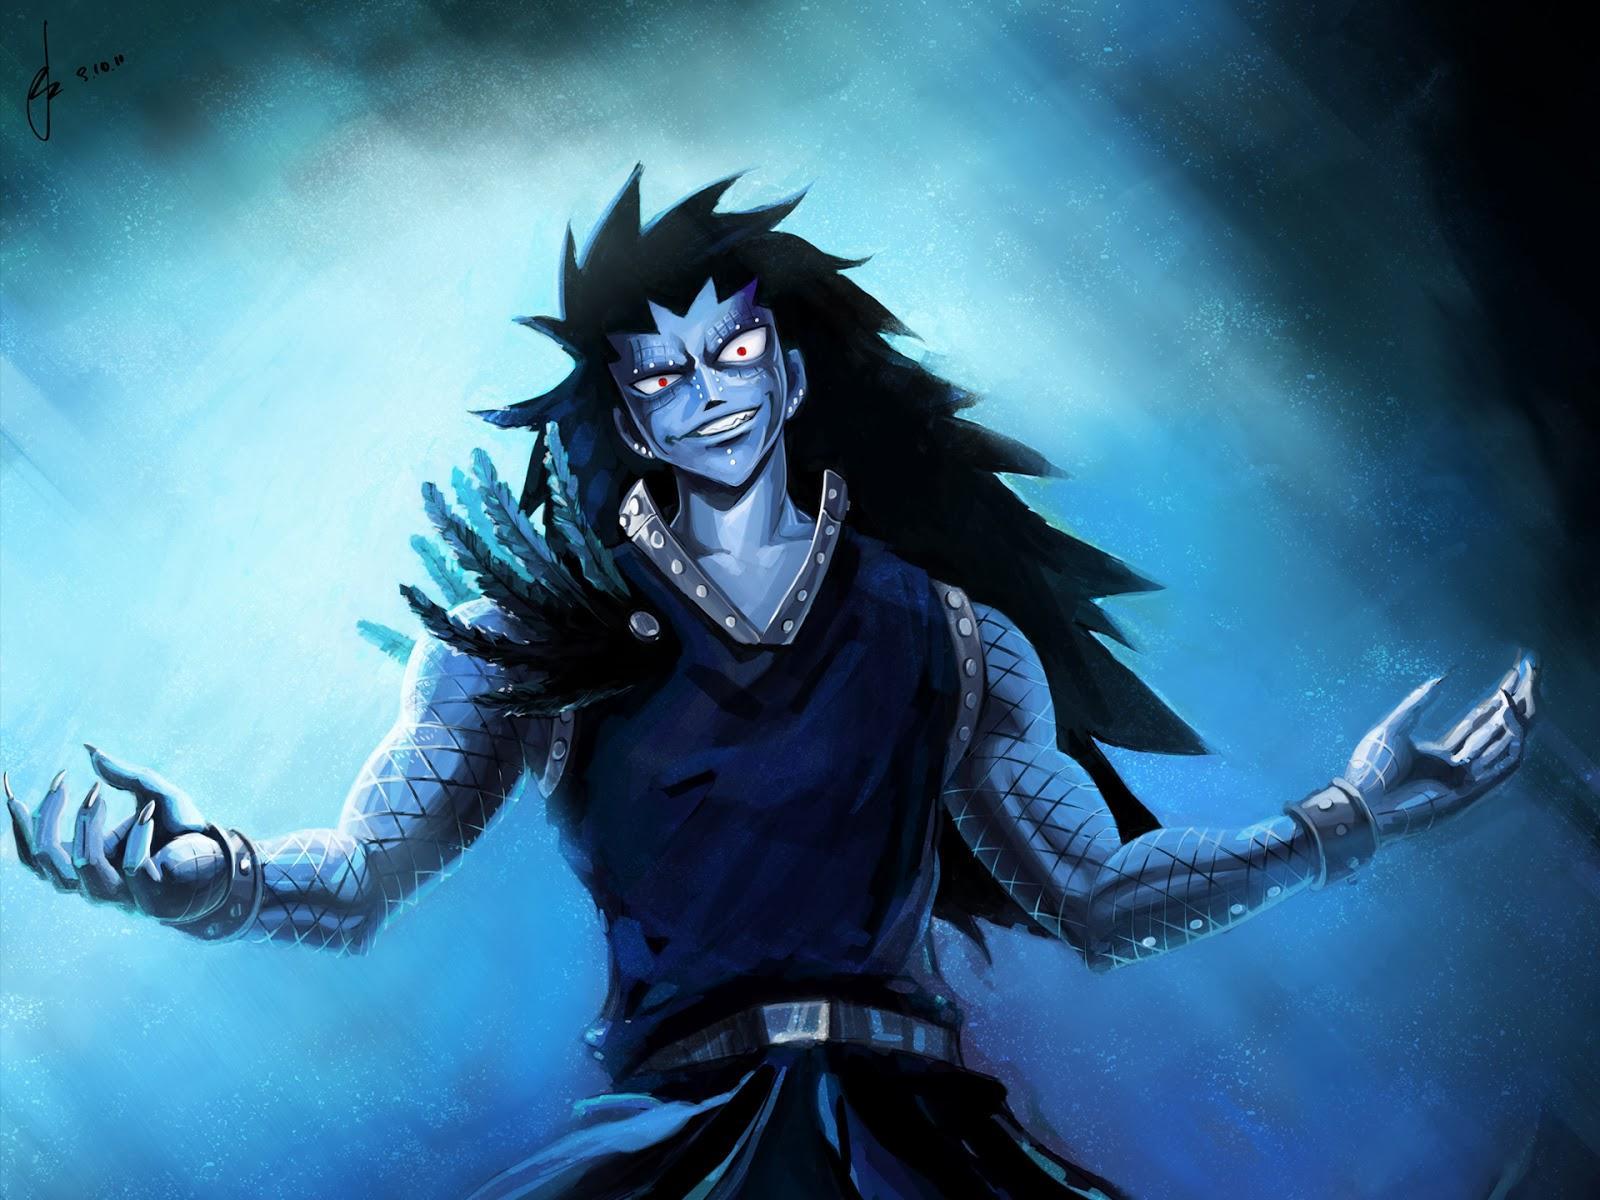  Fairy  Tail  Wallpaper  HD  for Android  APK Download